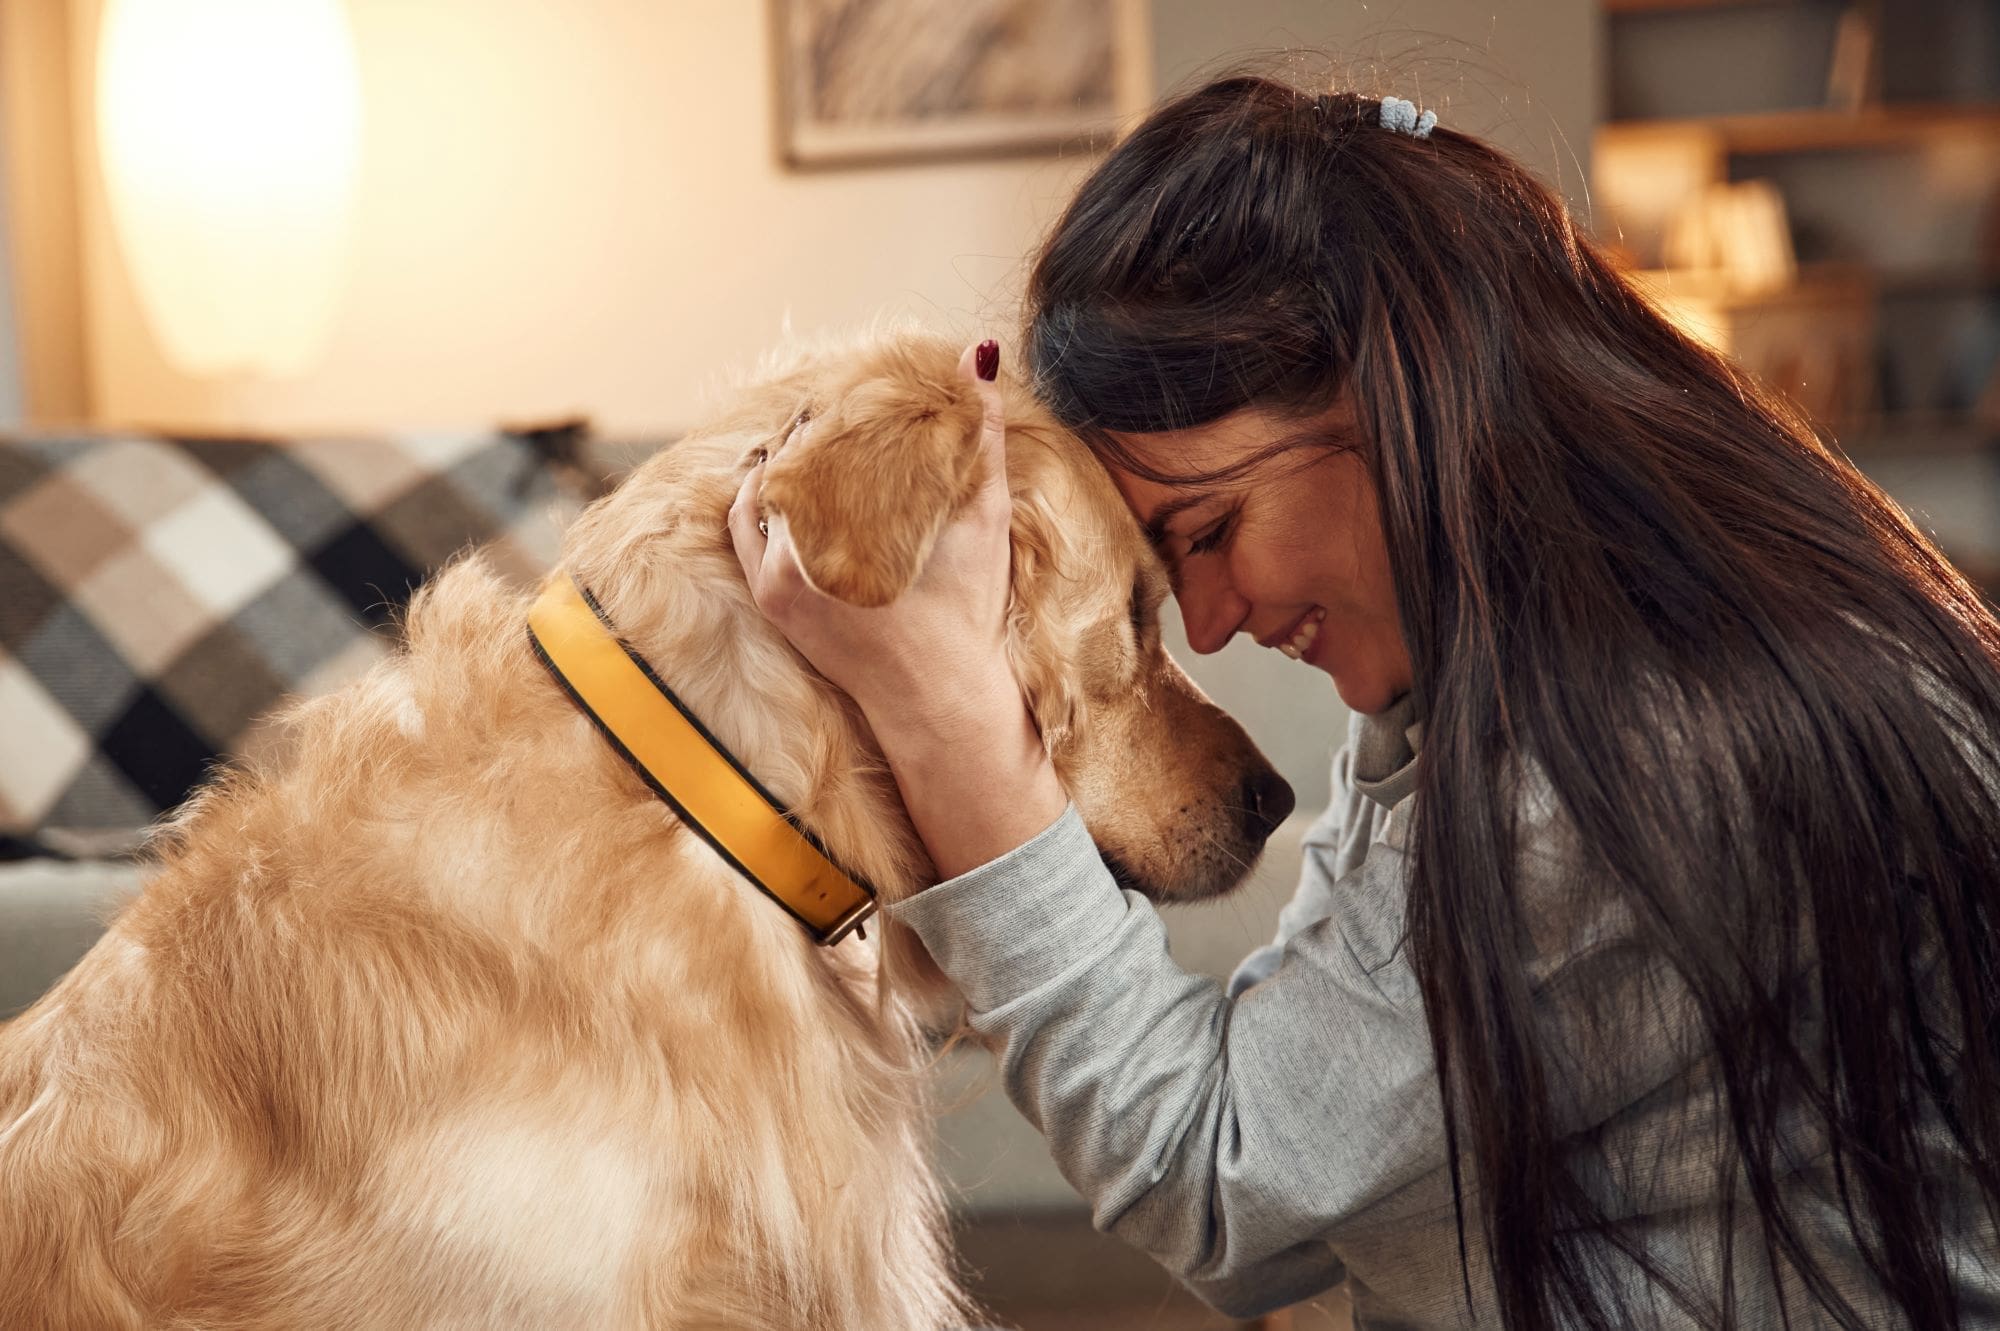 7 Emotional Support Dog Breeds for Comfort and Companionship